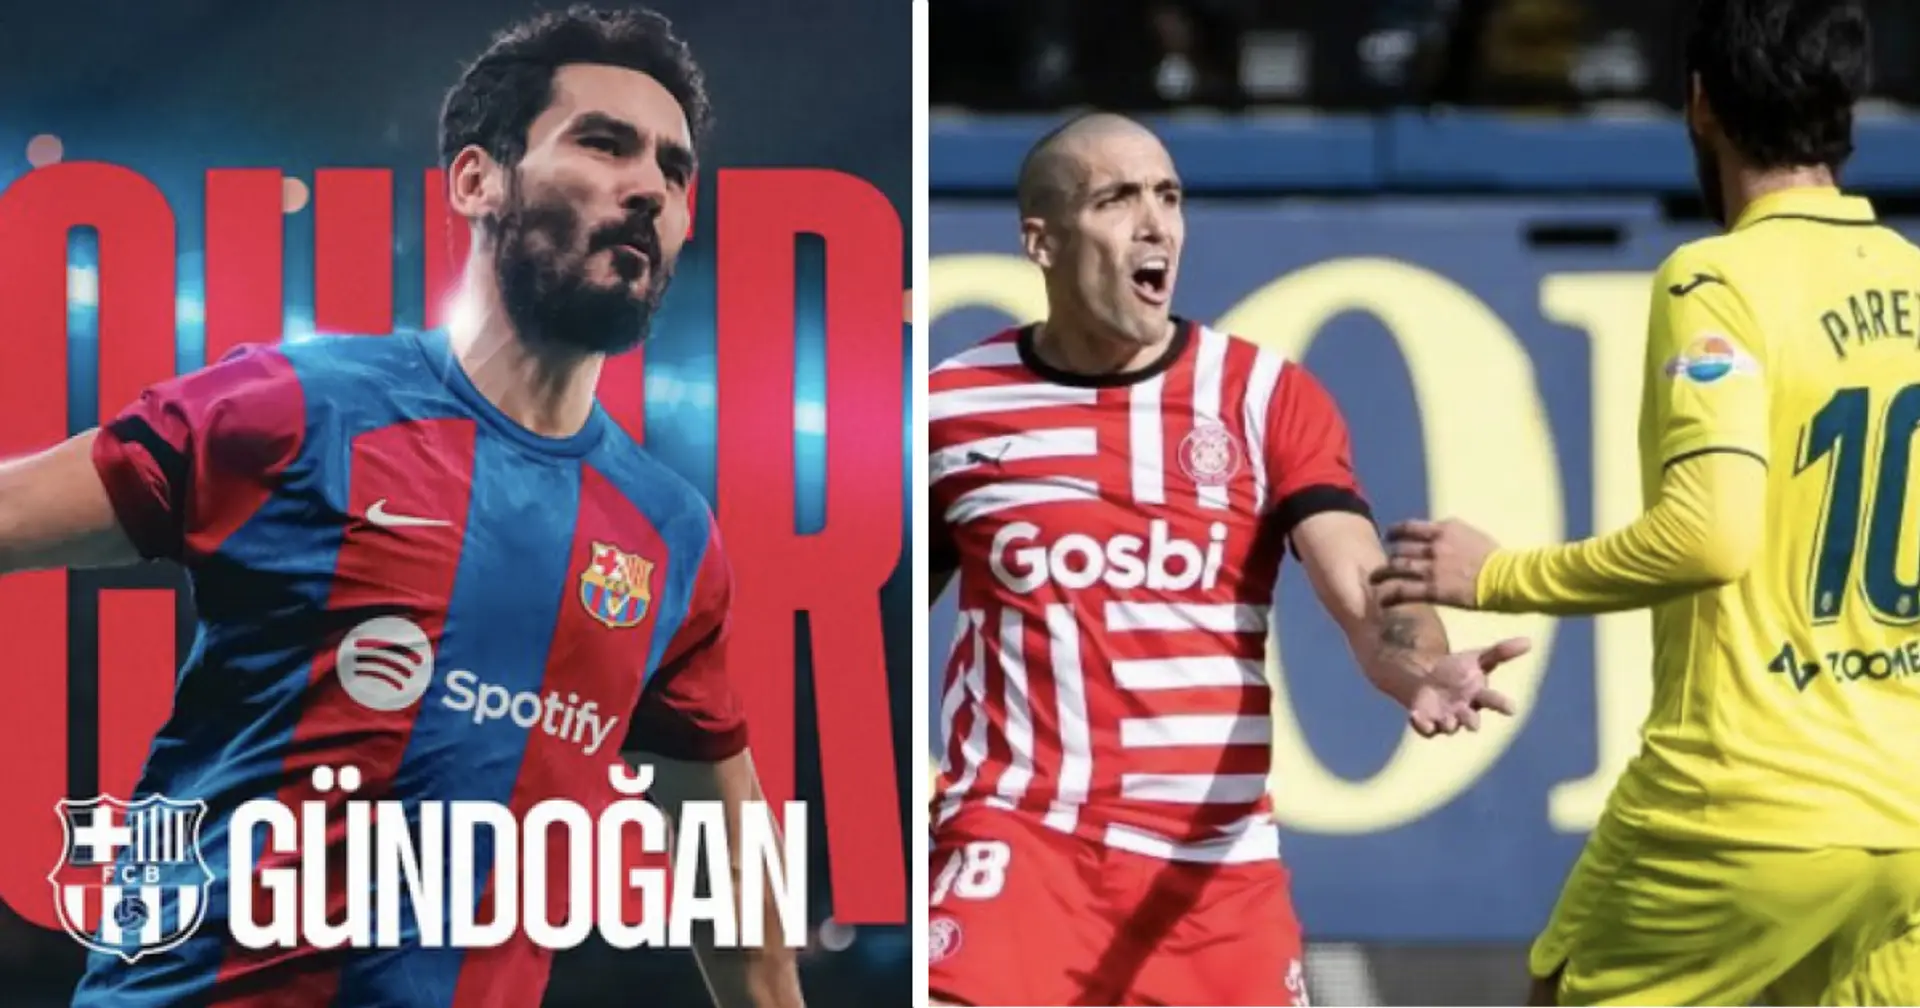 Barcelona sign Gundogan and 2 more big stories you might've missed